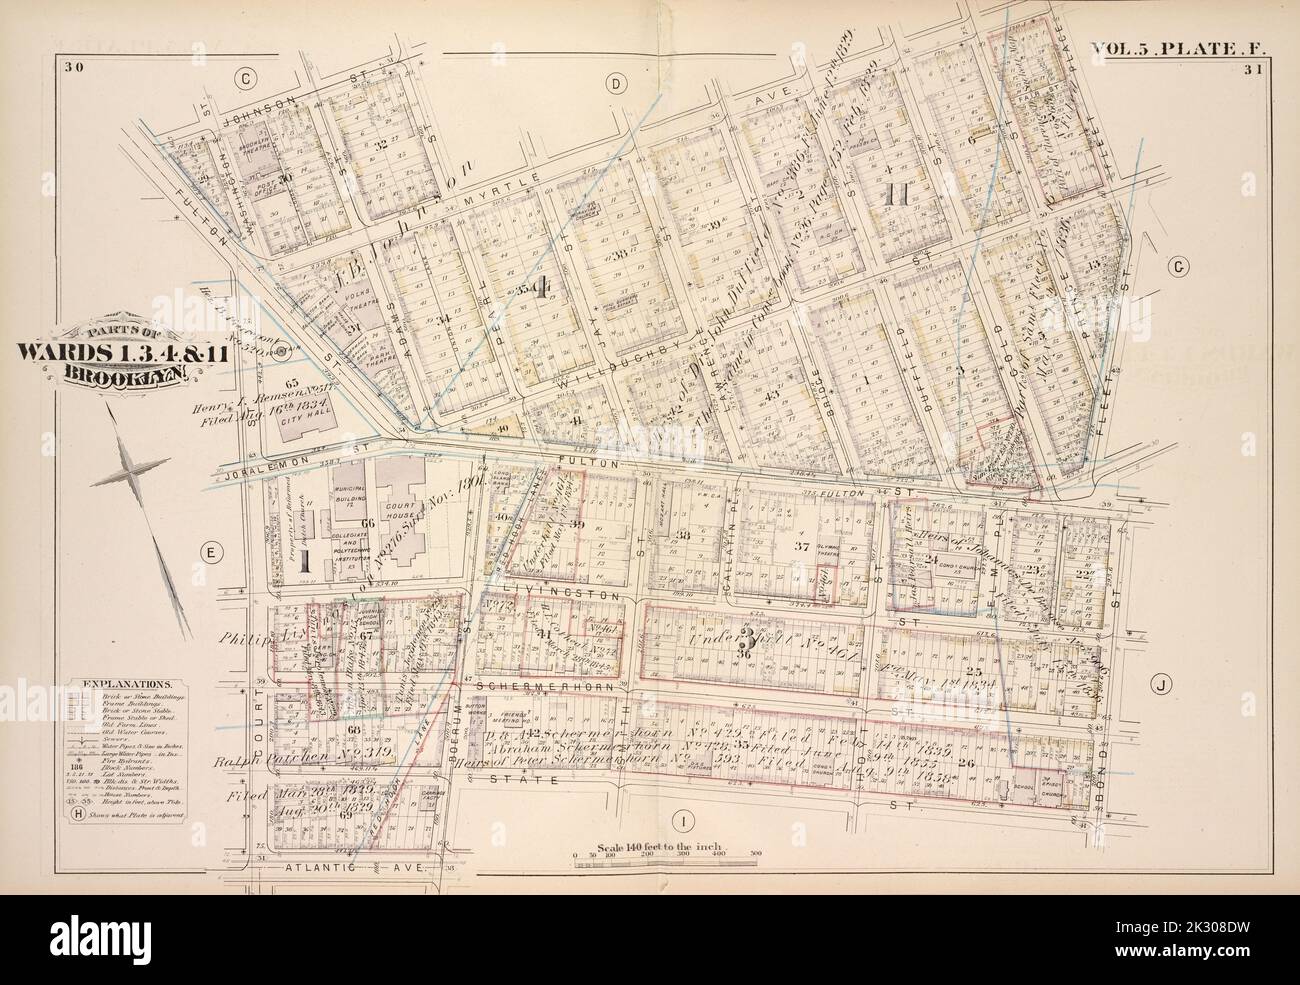 Cartographic, Maps. 1880. Lionel Pincus and Princess Firyal Map Division. Brooklyn (New York, N.Y.), Real property , New York (State) , New York Vol. 5. Plate, F. Map bound by Johnson St., Pearl St., Myrtle Ave., Fleet Place, Fleet St., Bond St., State St., Boerum St., Atlantic Ave., Court St., Fulton St.; Including Fair St., Willoughby St., Livingston St., Schermerhorn St., Washington St., Adams St., Jay St., Smith St., Lawrence St., Gallatin Pl., Bridge St., Hoyt St., Duffield St., Elm St., Gold St., Prince St. Stock Photo